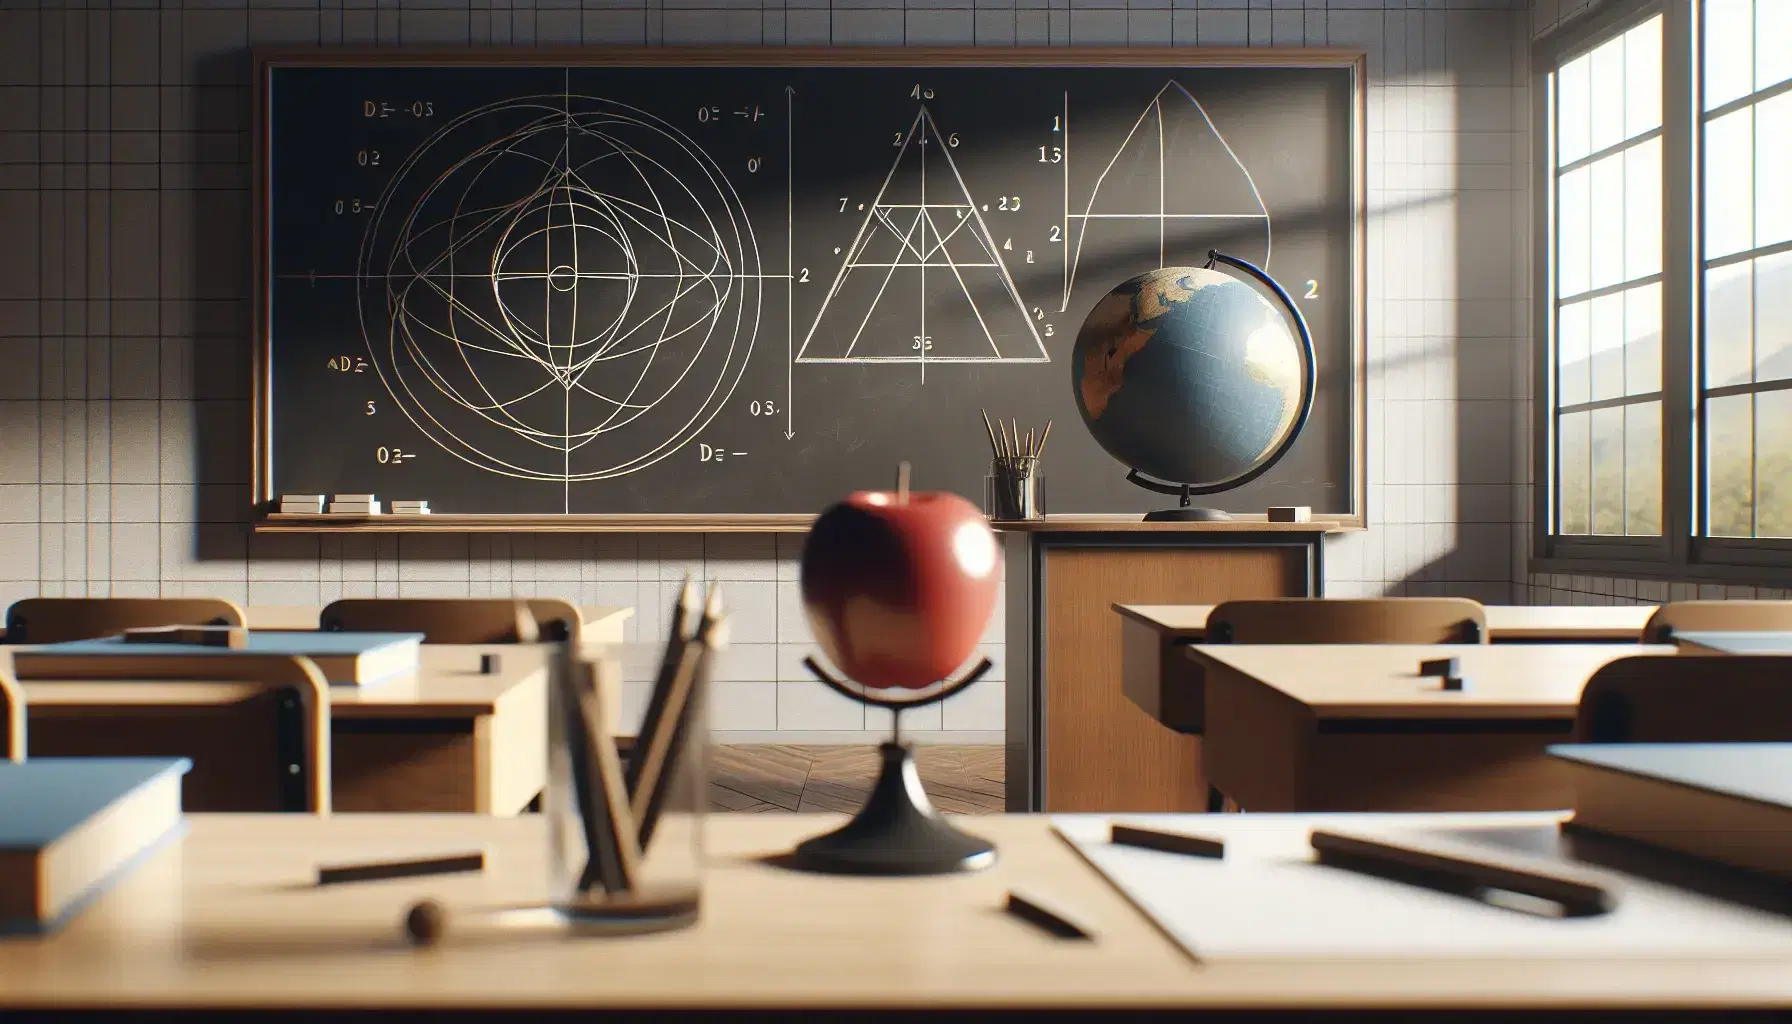 Classroom with blackboard showing geometric shapes, teacher's desk with apple, water glass, and globe, in a sunlit, orderly setting.